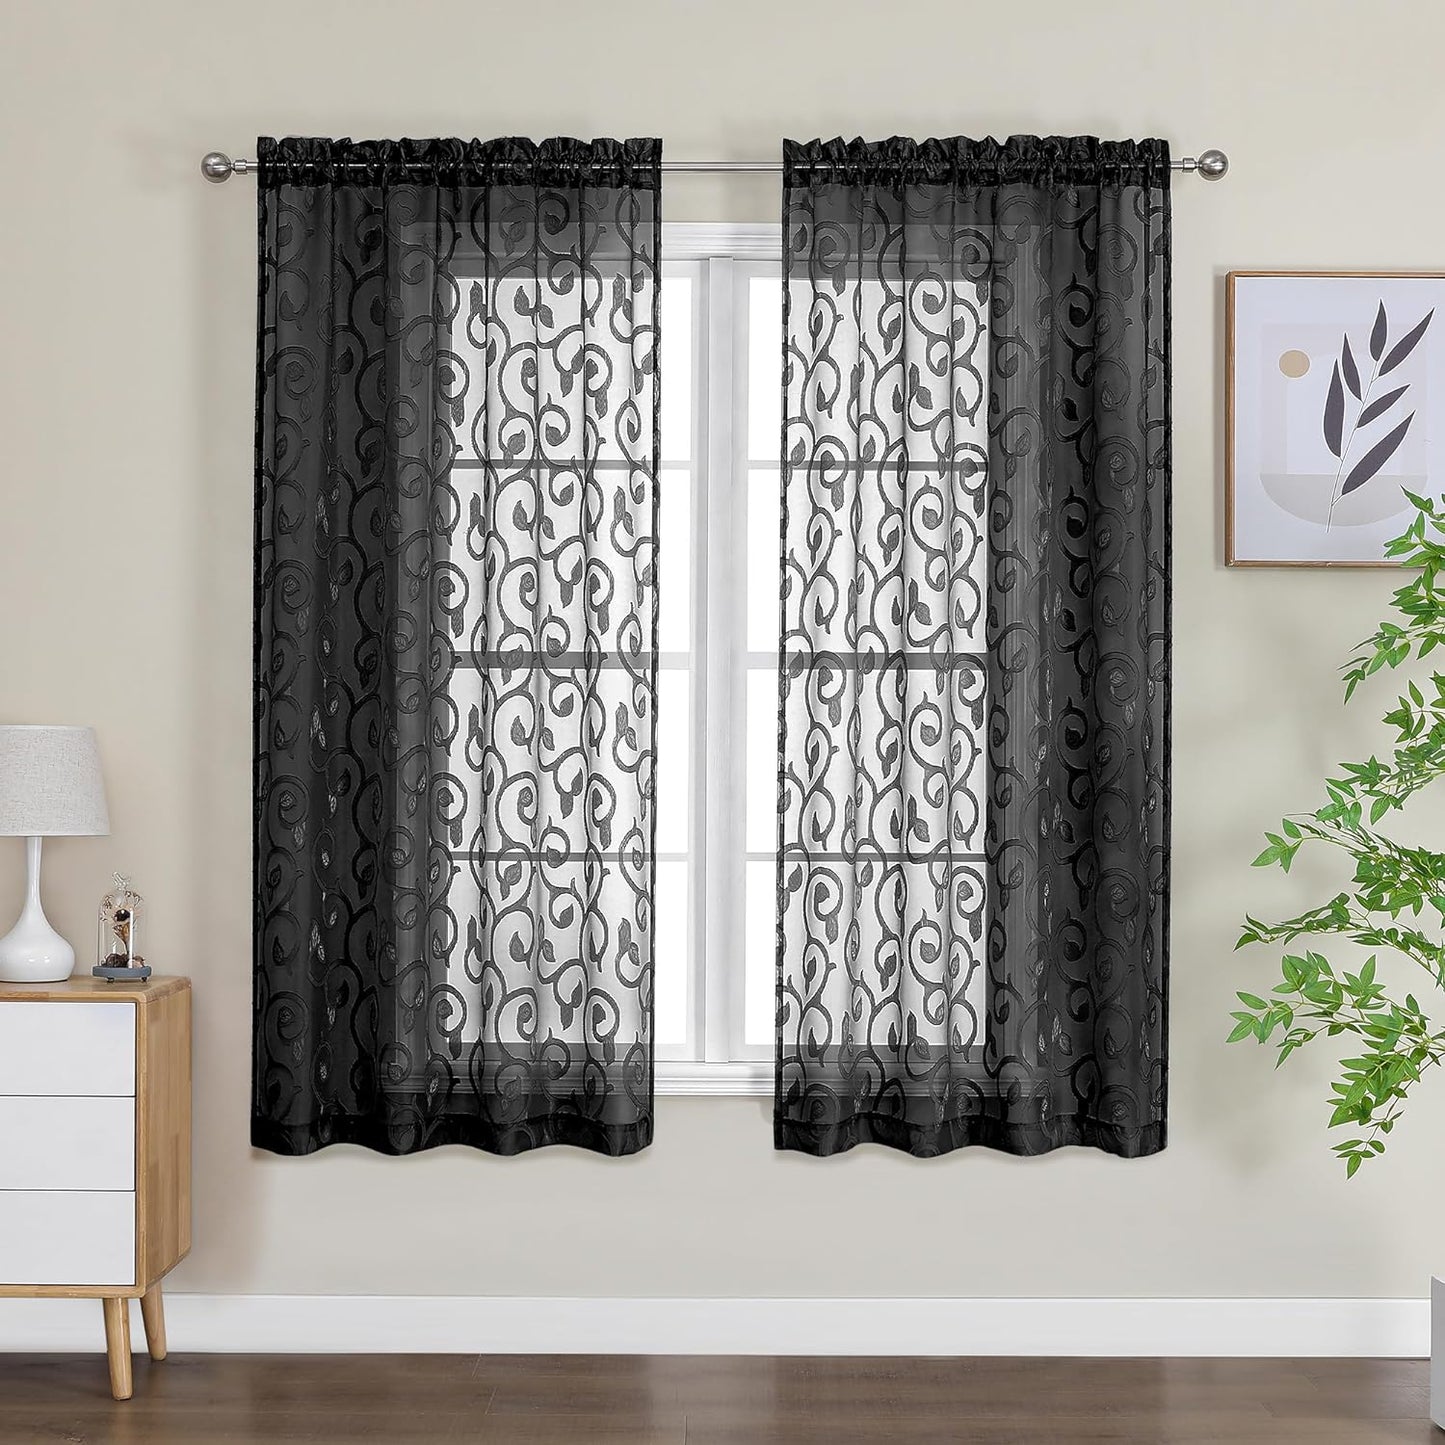 OWENIE Furman Sheer Curtains 84 Inches Long for Bedroom Living Room 2 Panels Set, Light Filtering Window Curtains, Semi Transparent Voile Top Dual Rod Pocket, Grey, 40Wx84L Inch, Total 84 Inches Width  OWENIE Black 40W X 63L 